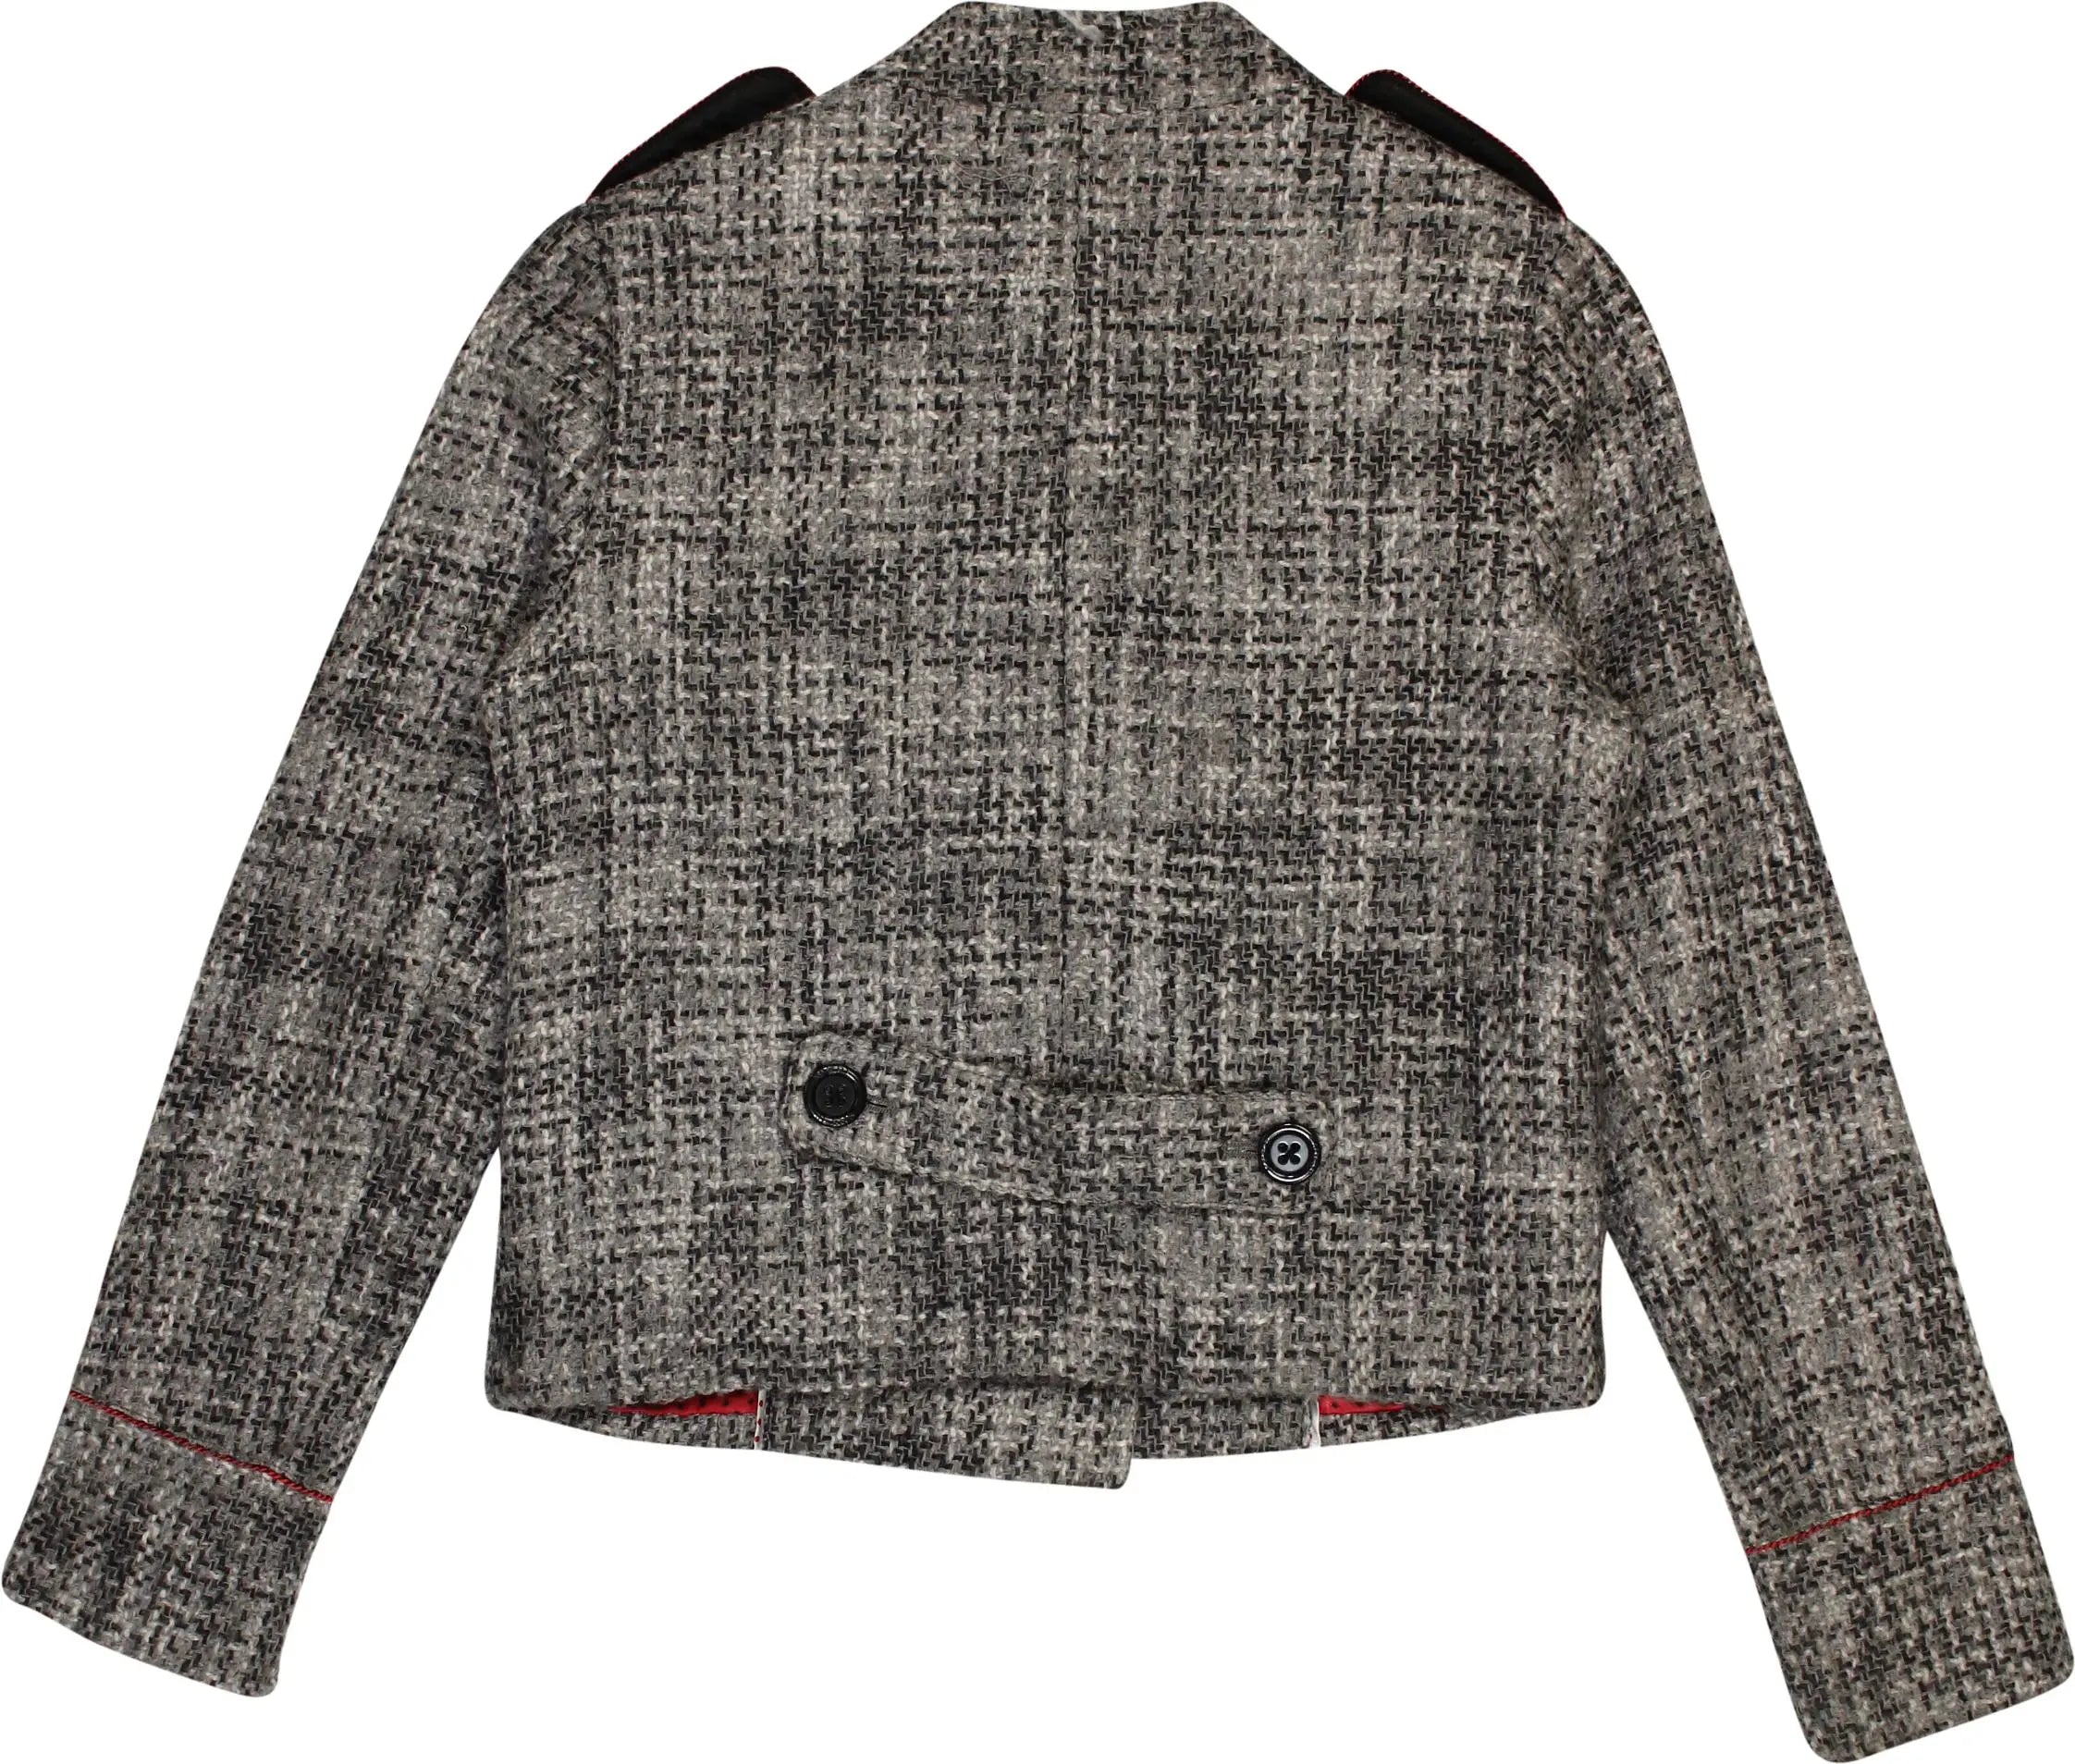 Pepe Jeans - Grey Wool Blend Jacket by Pepe Jeans- ThriftTale.com - Vintage and second handclothing